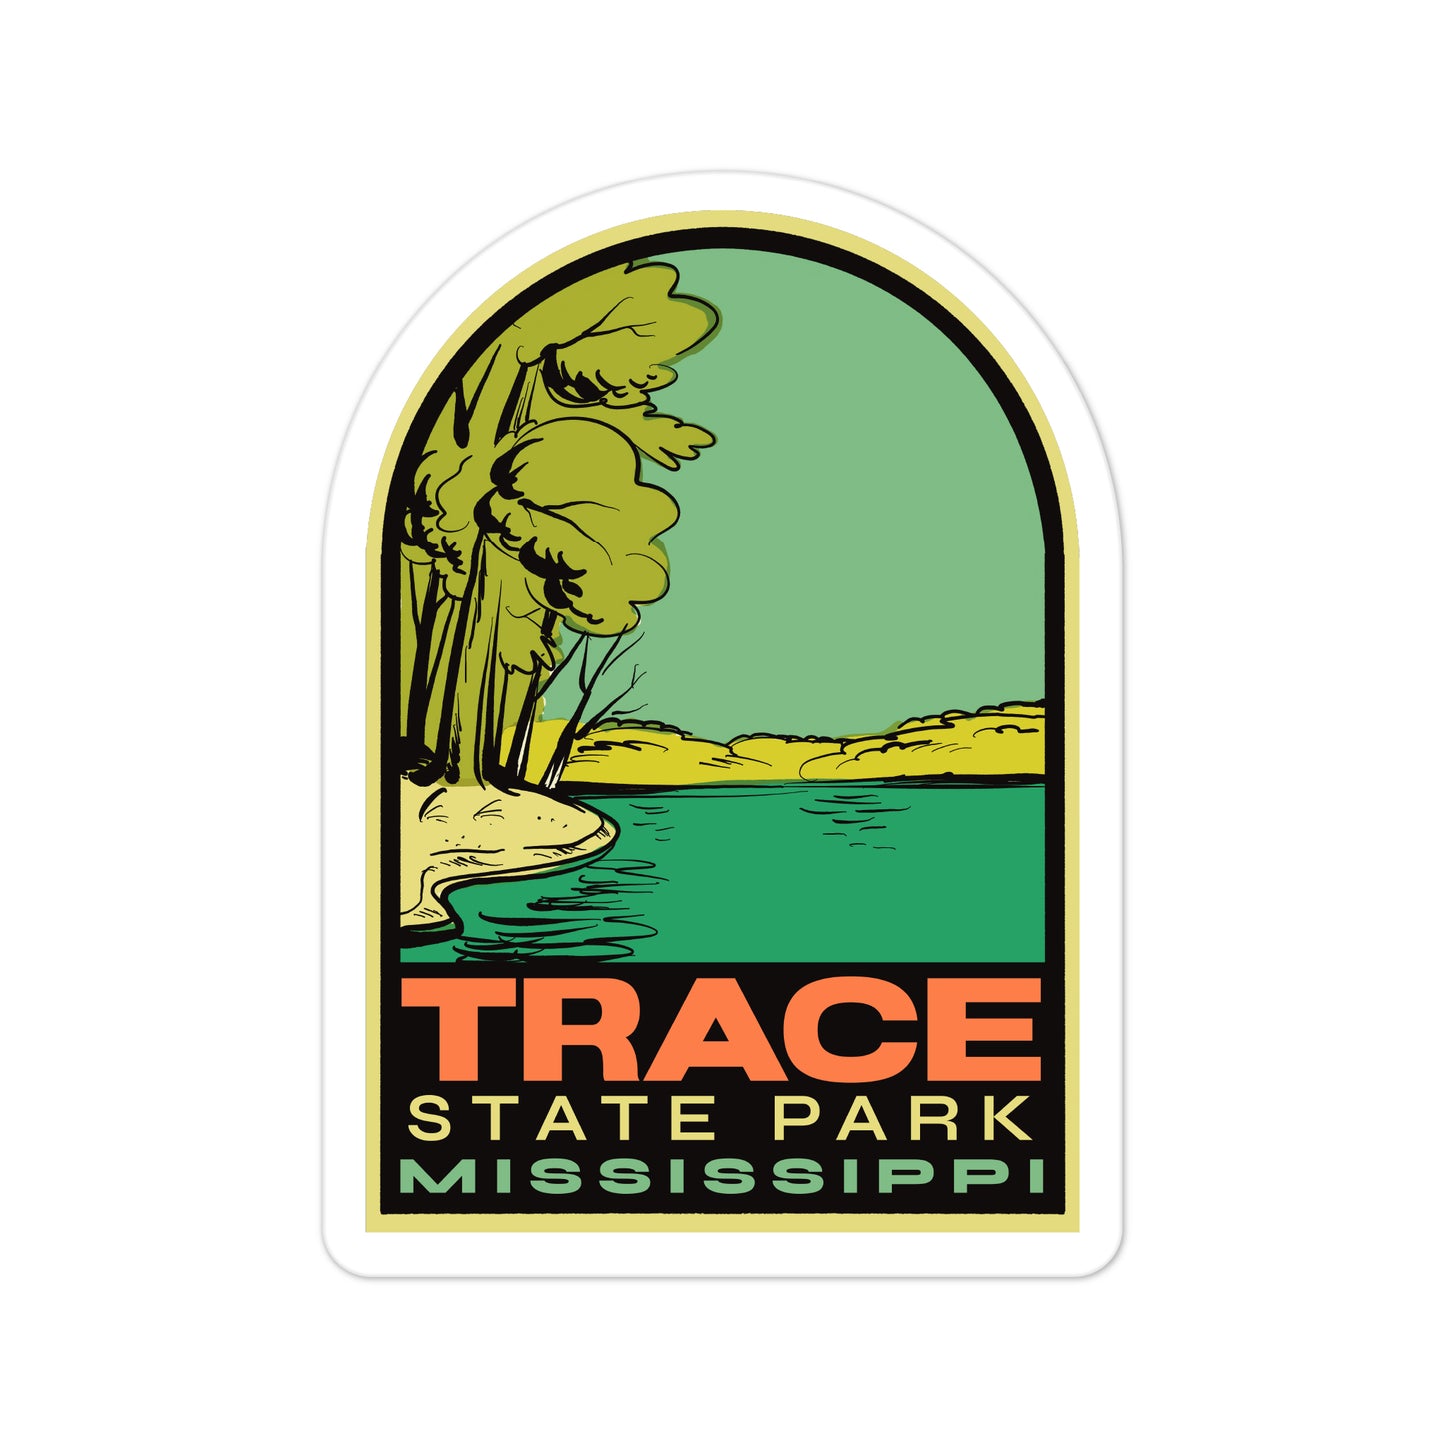 A sticker of Trace State Park